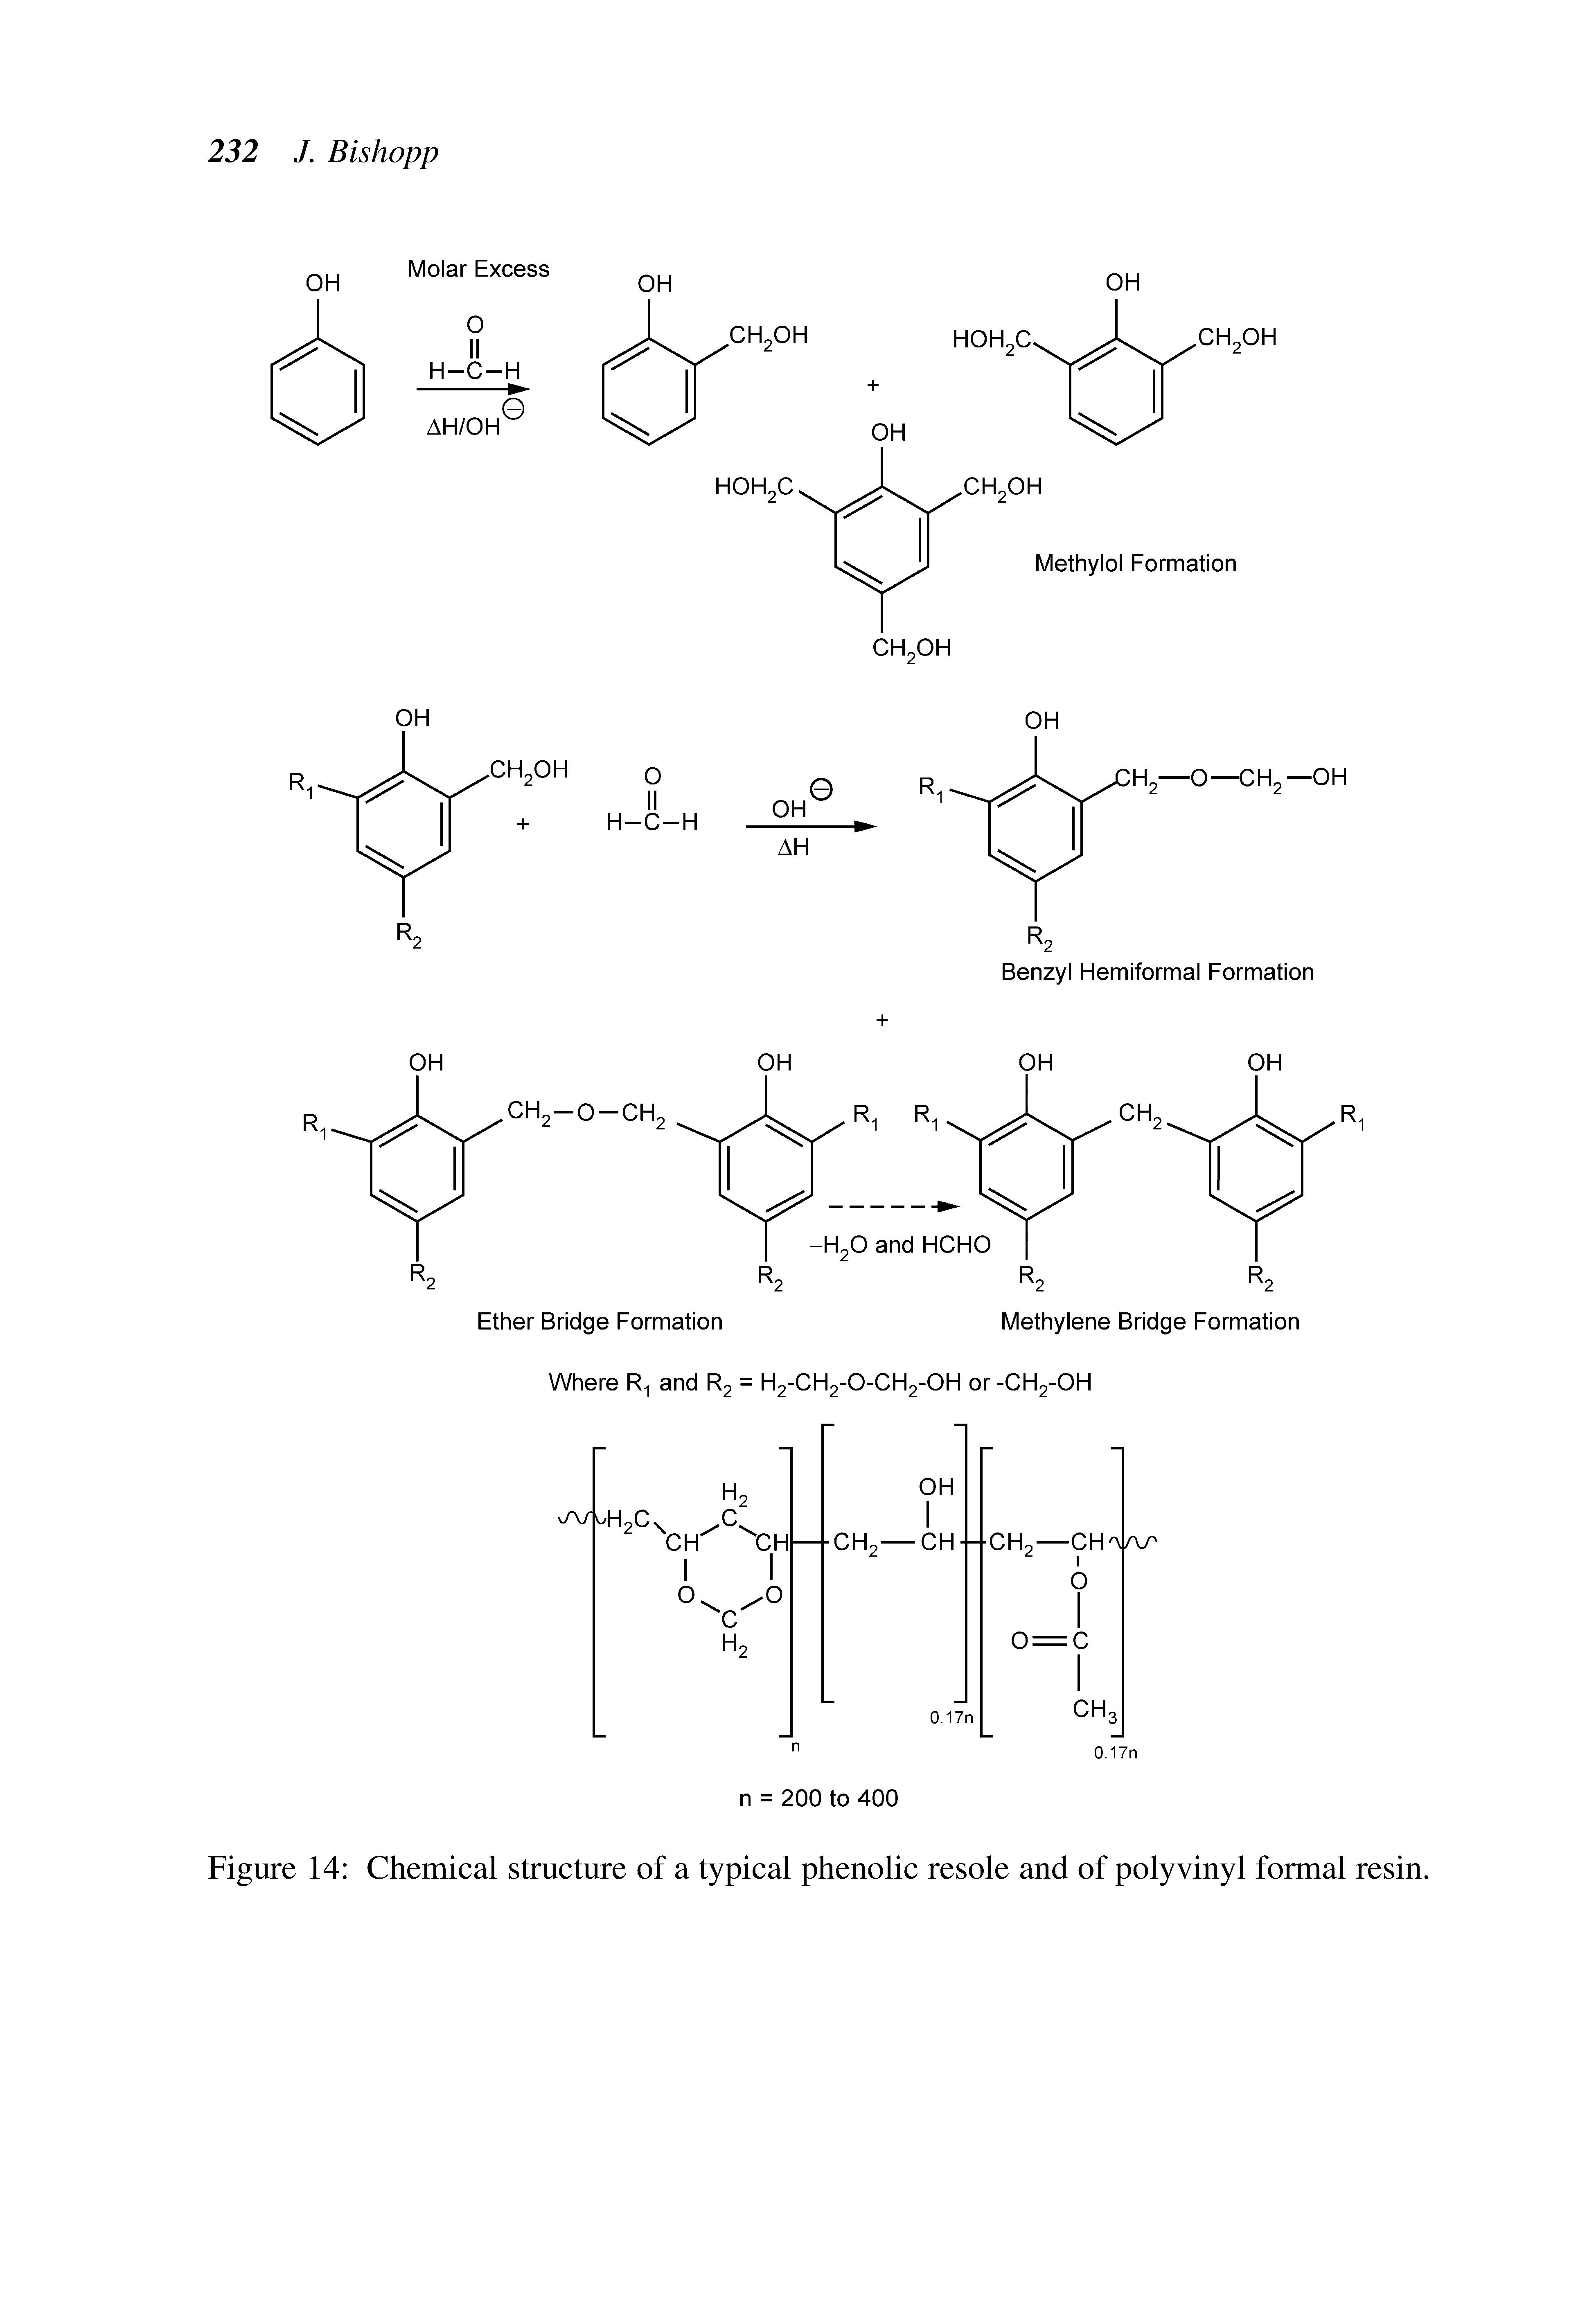 Figure 14 Chemical structure of a typical phenolic resole and of polyvinyl formal resin.